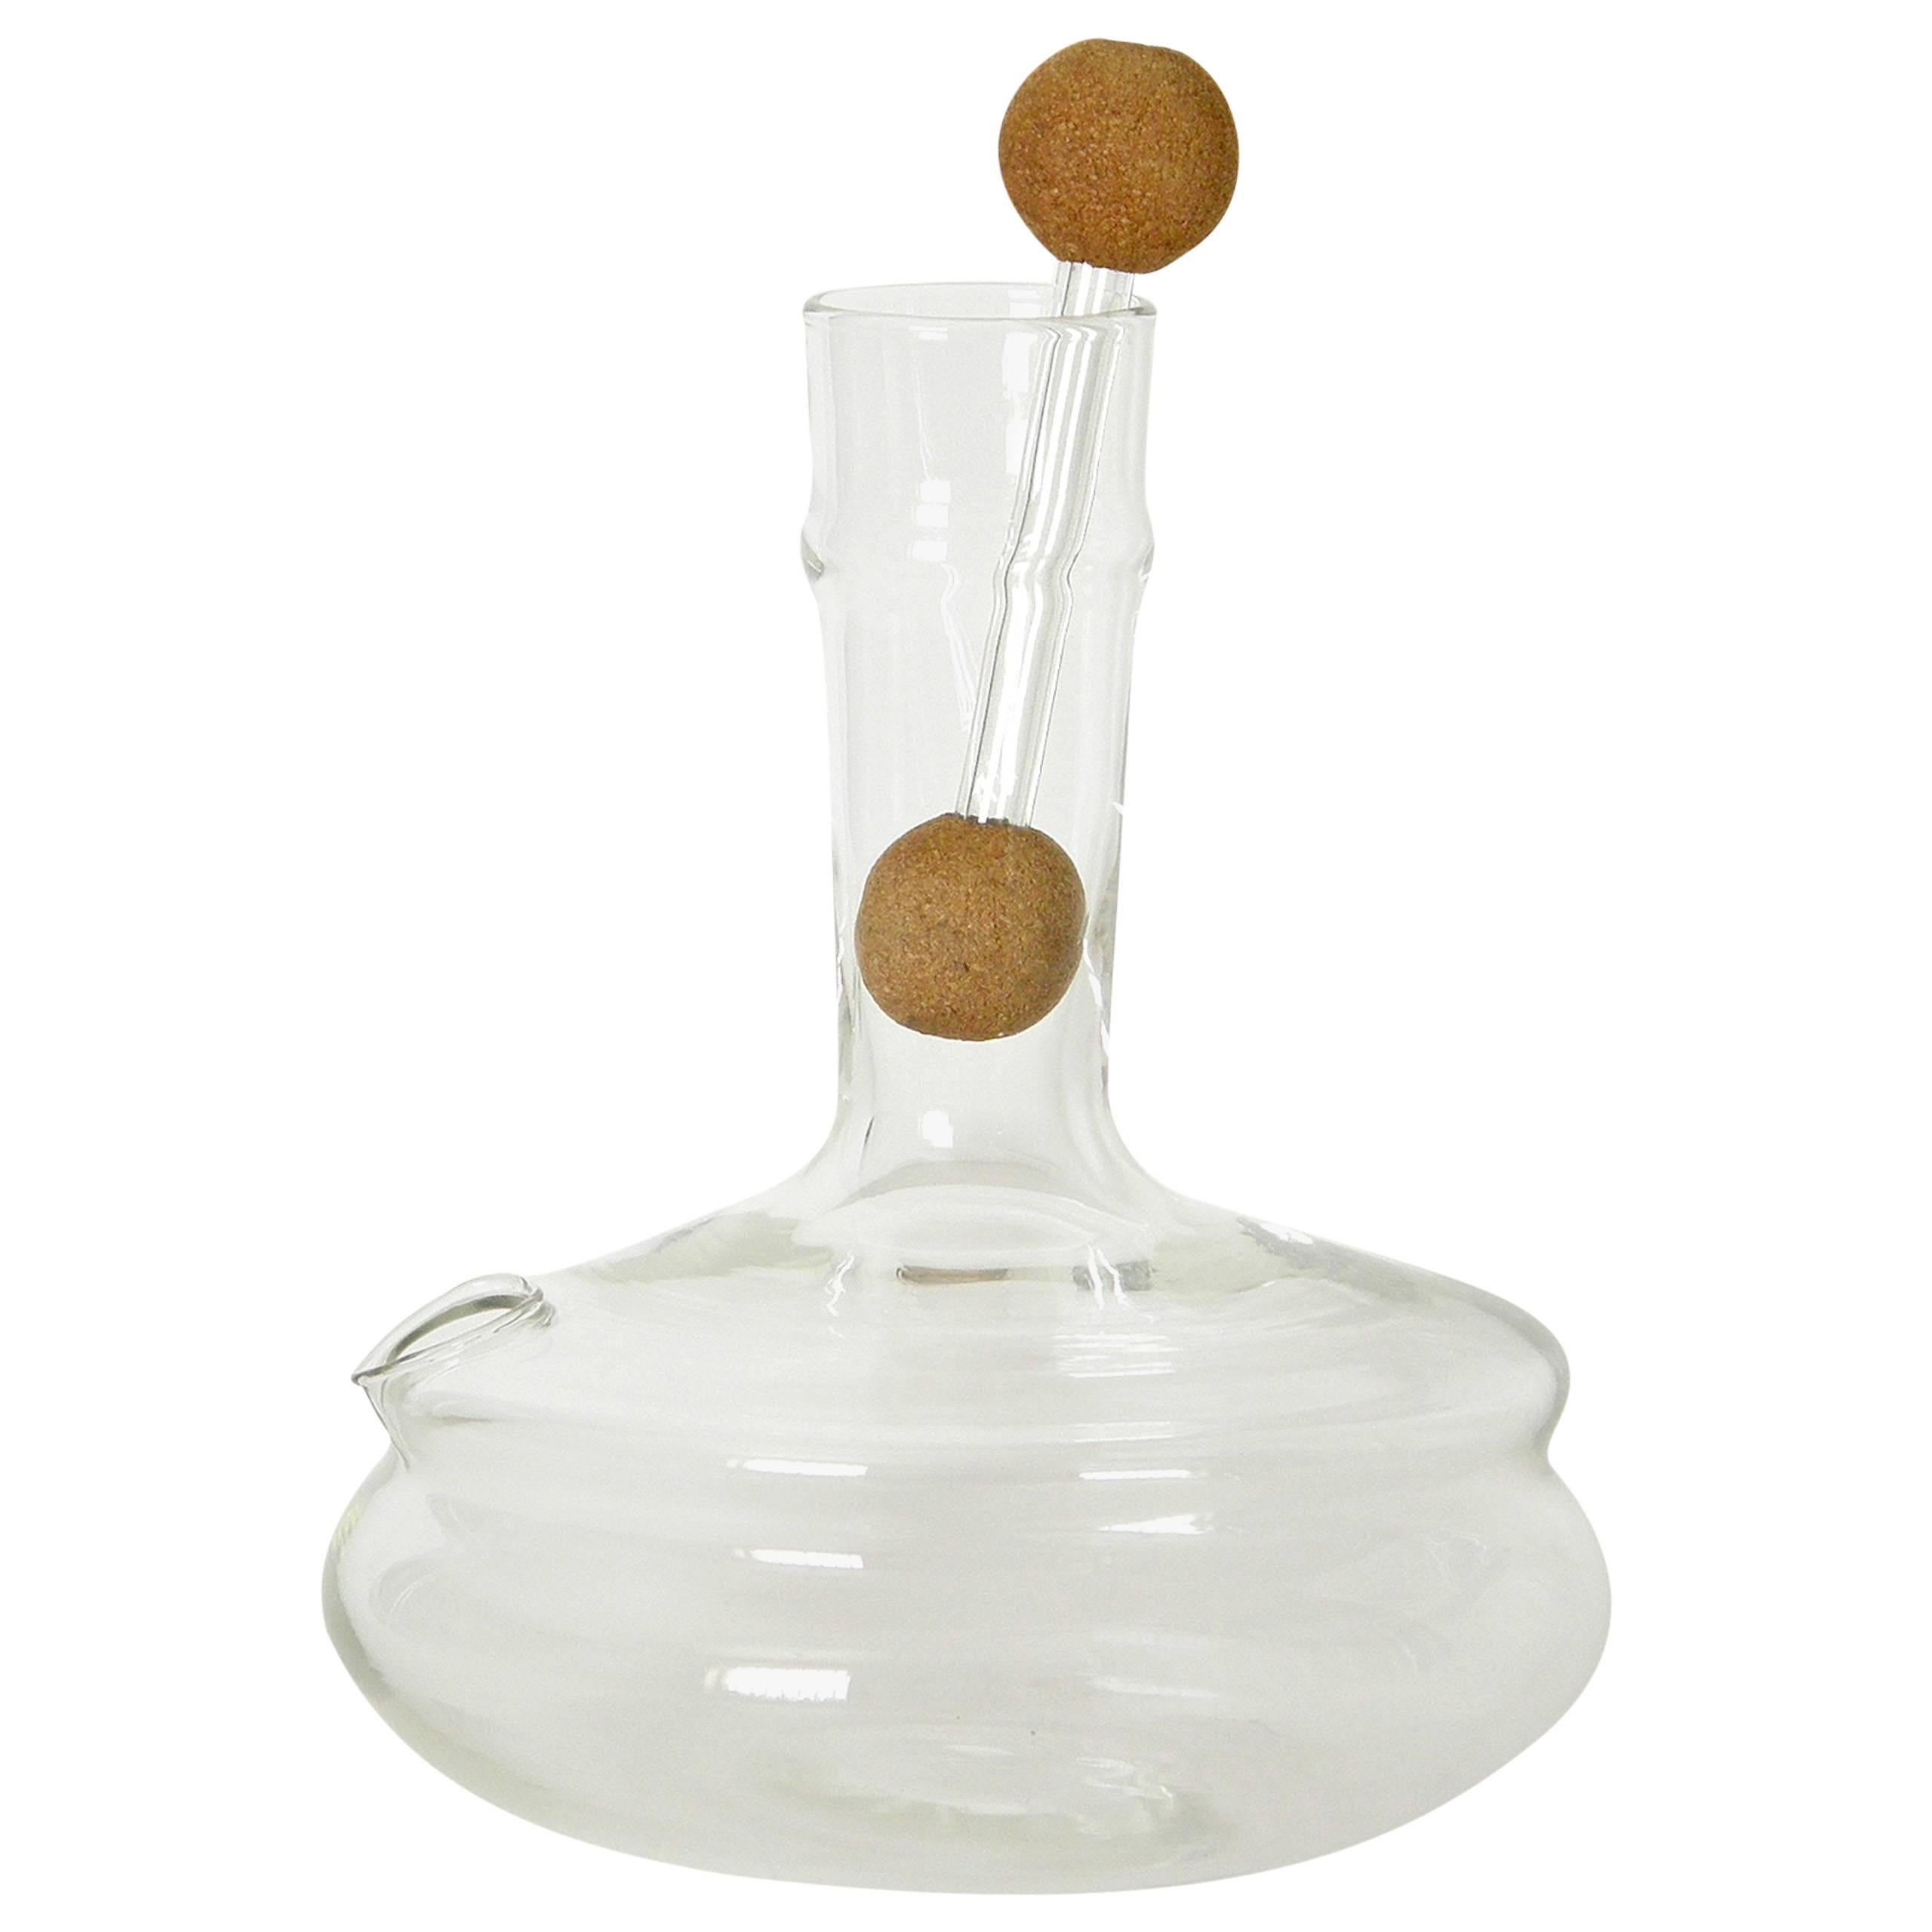 Dr. Peter Schlumbohm for Chemex Glass Water Kettle with Cork Balls Stopper